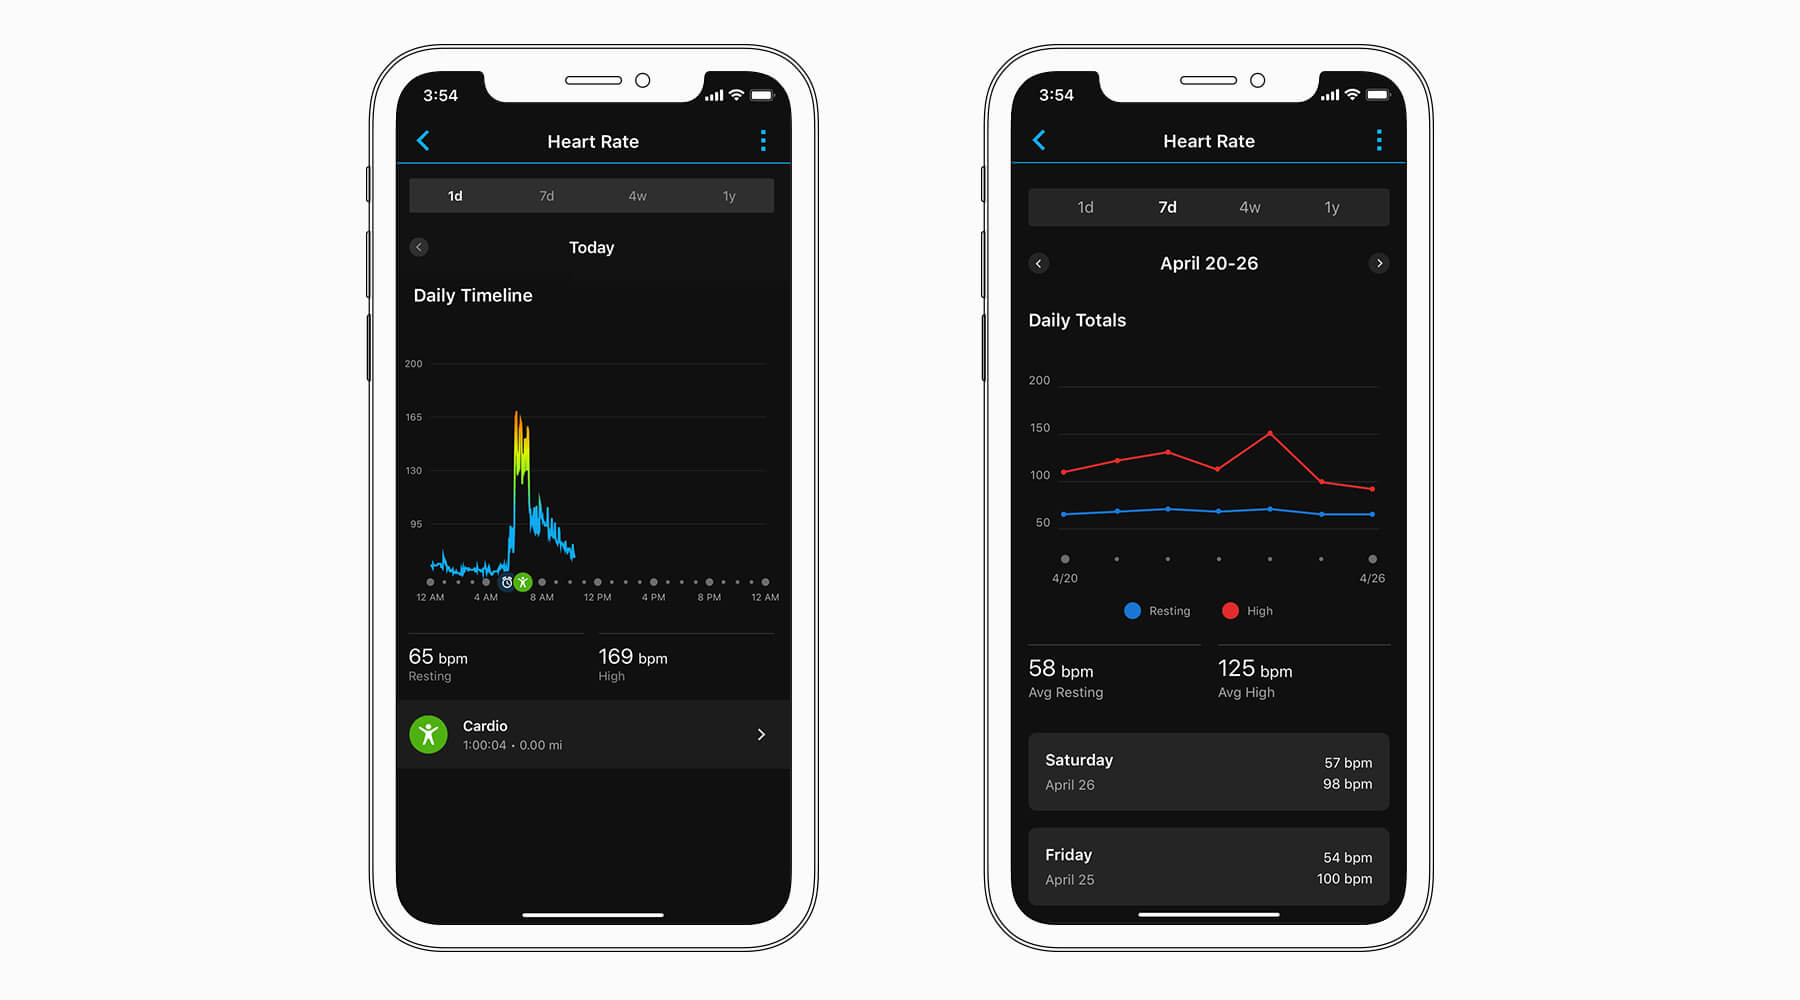 Heart Rate Monitoring on app